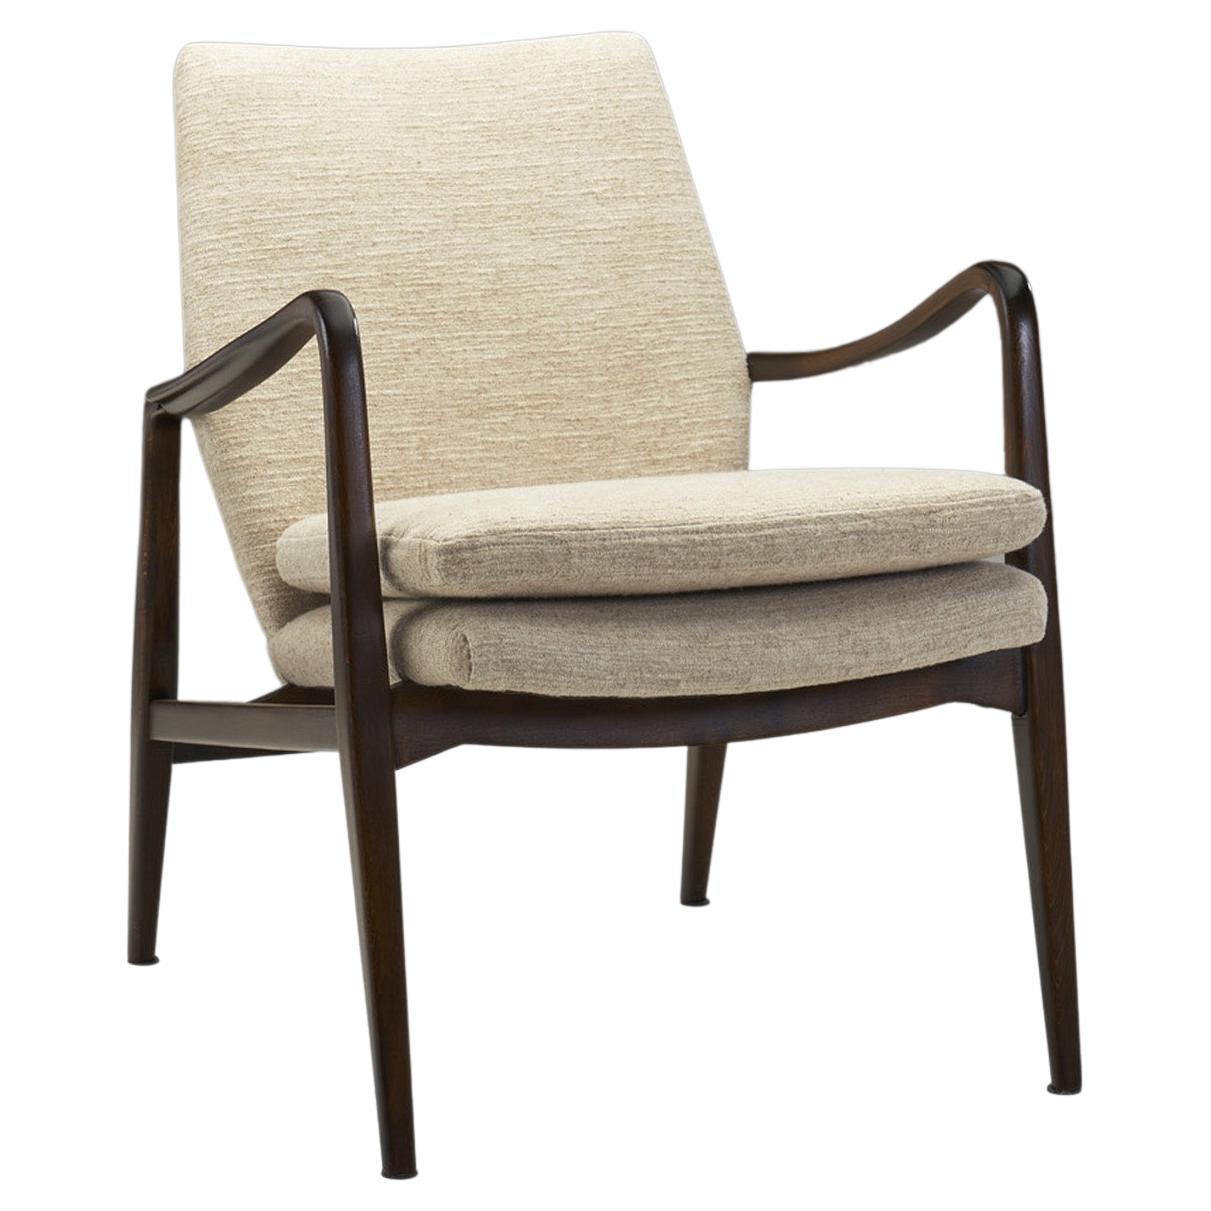 Swedish Modern Upholstered Armchair by Axel Larsson 'Attr.', Sweden, Ca 1950s For Sale